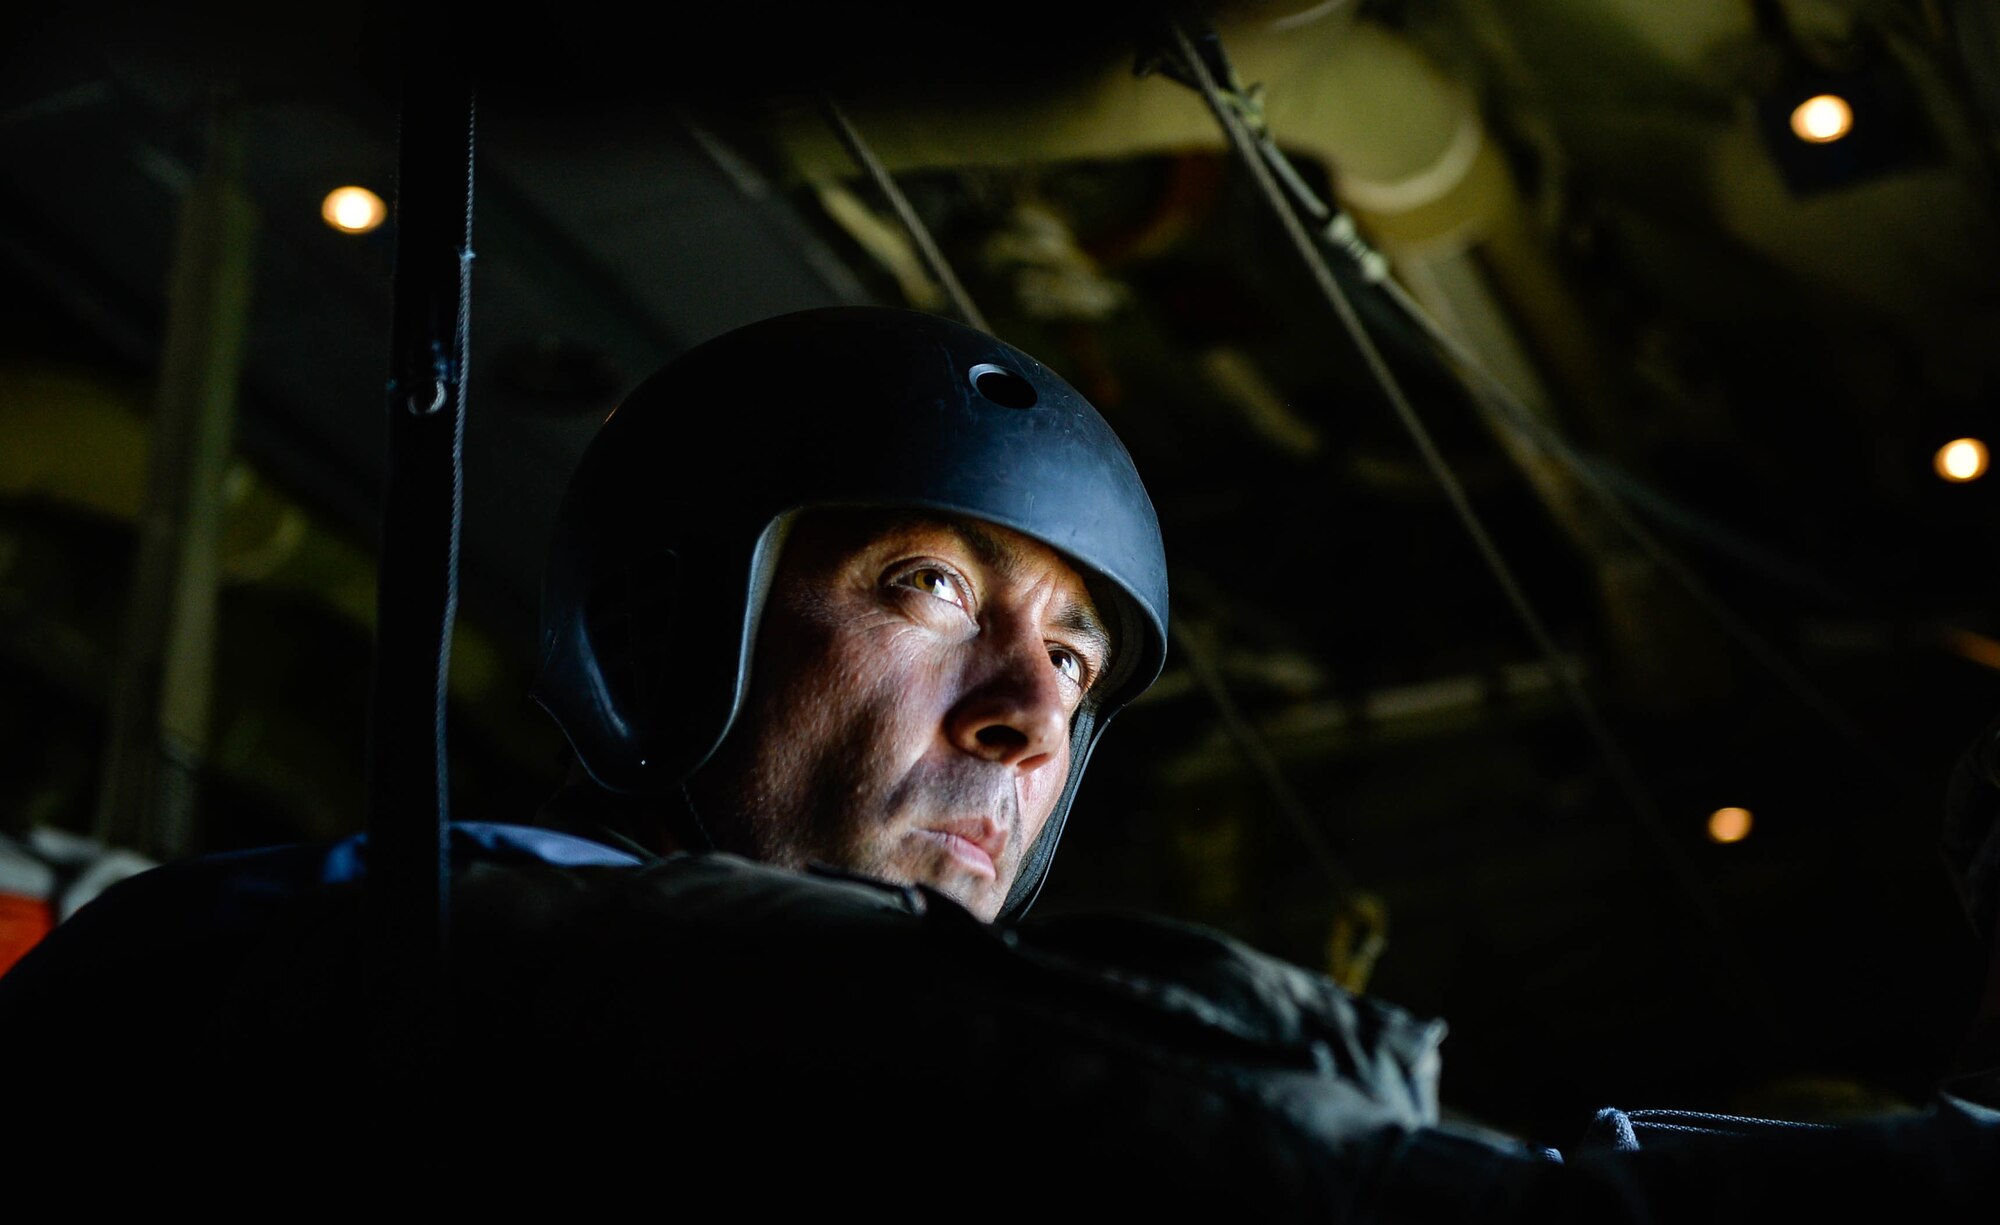 A Polish military parachute instructor prepares to drop his paratroopers from a U.S. Air Force C-130J Super Hercules over Poland Aug. 7, 2018. U.S. Airmen assigned to the 86th Airlift Wing and U.S. Soldiers assigned to the 5th Quartermaster worked with their Polish partners to airdrop paratroopers during the annual Aviation Rotation bilateral exercise. (U.S. Air Force photo by Senior Airman Joshua Magbanua)